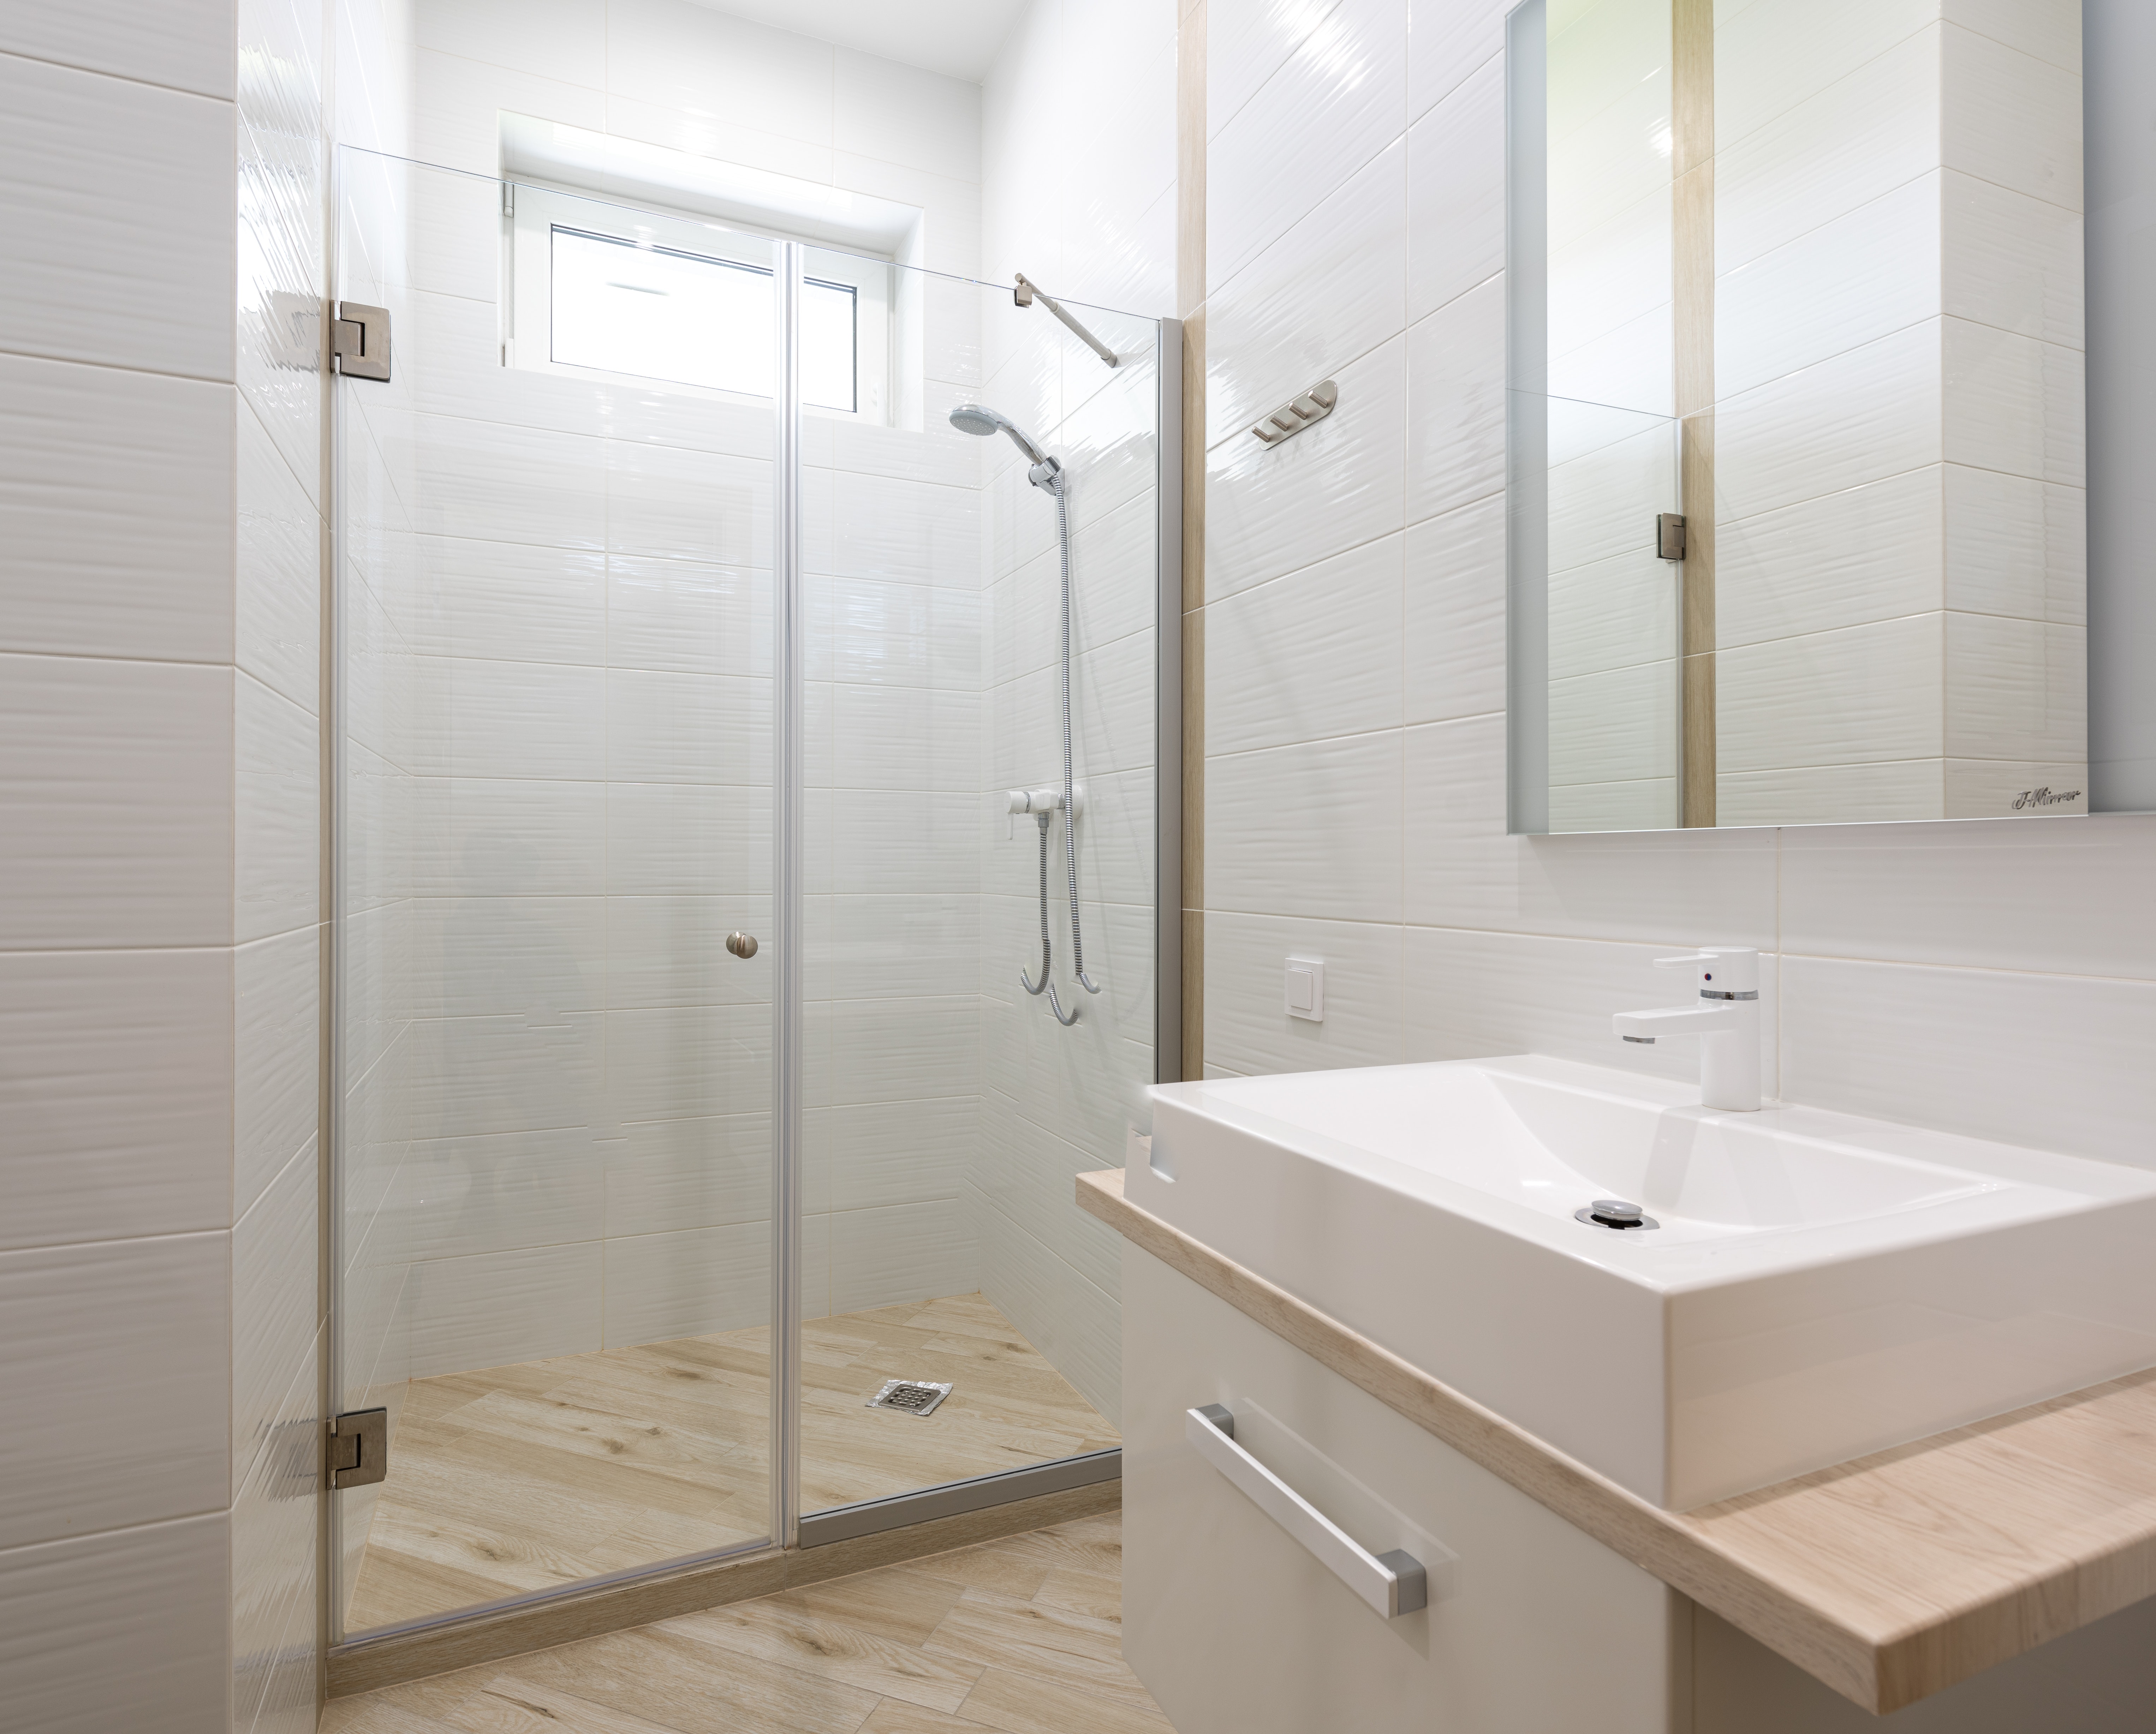 A frameless glass shower panel installed by professionals